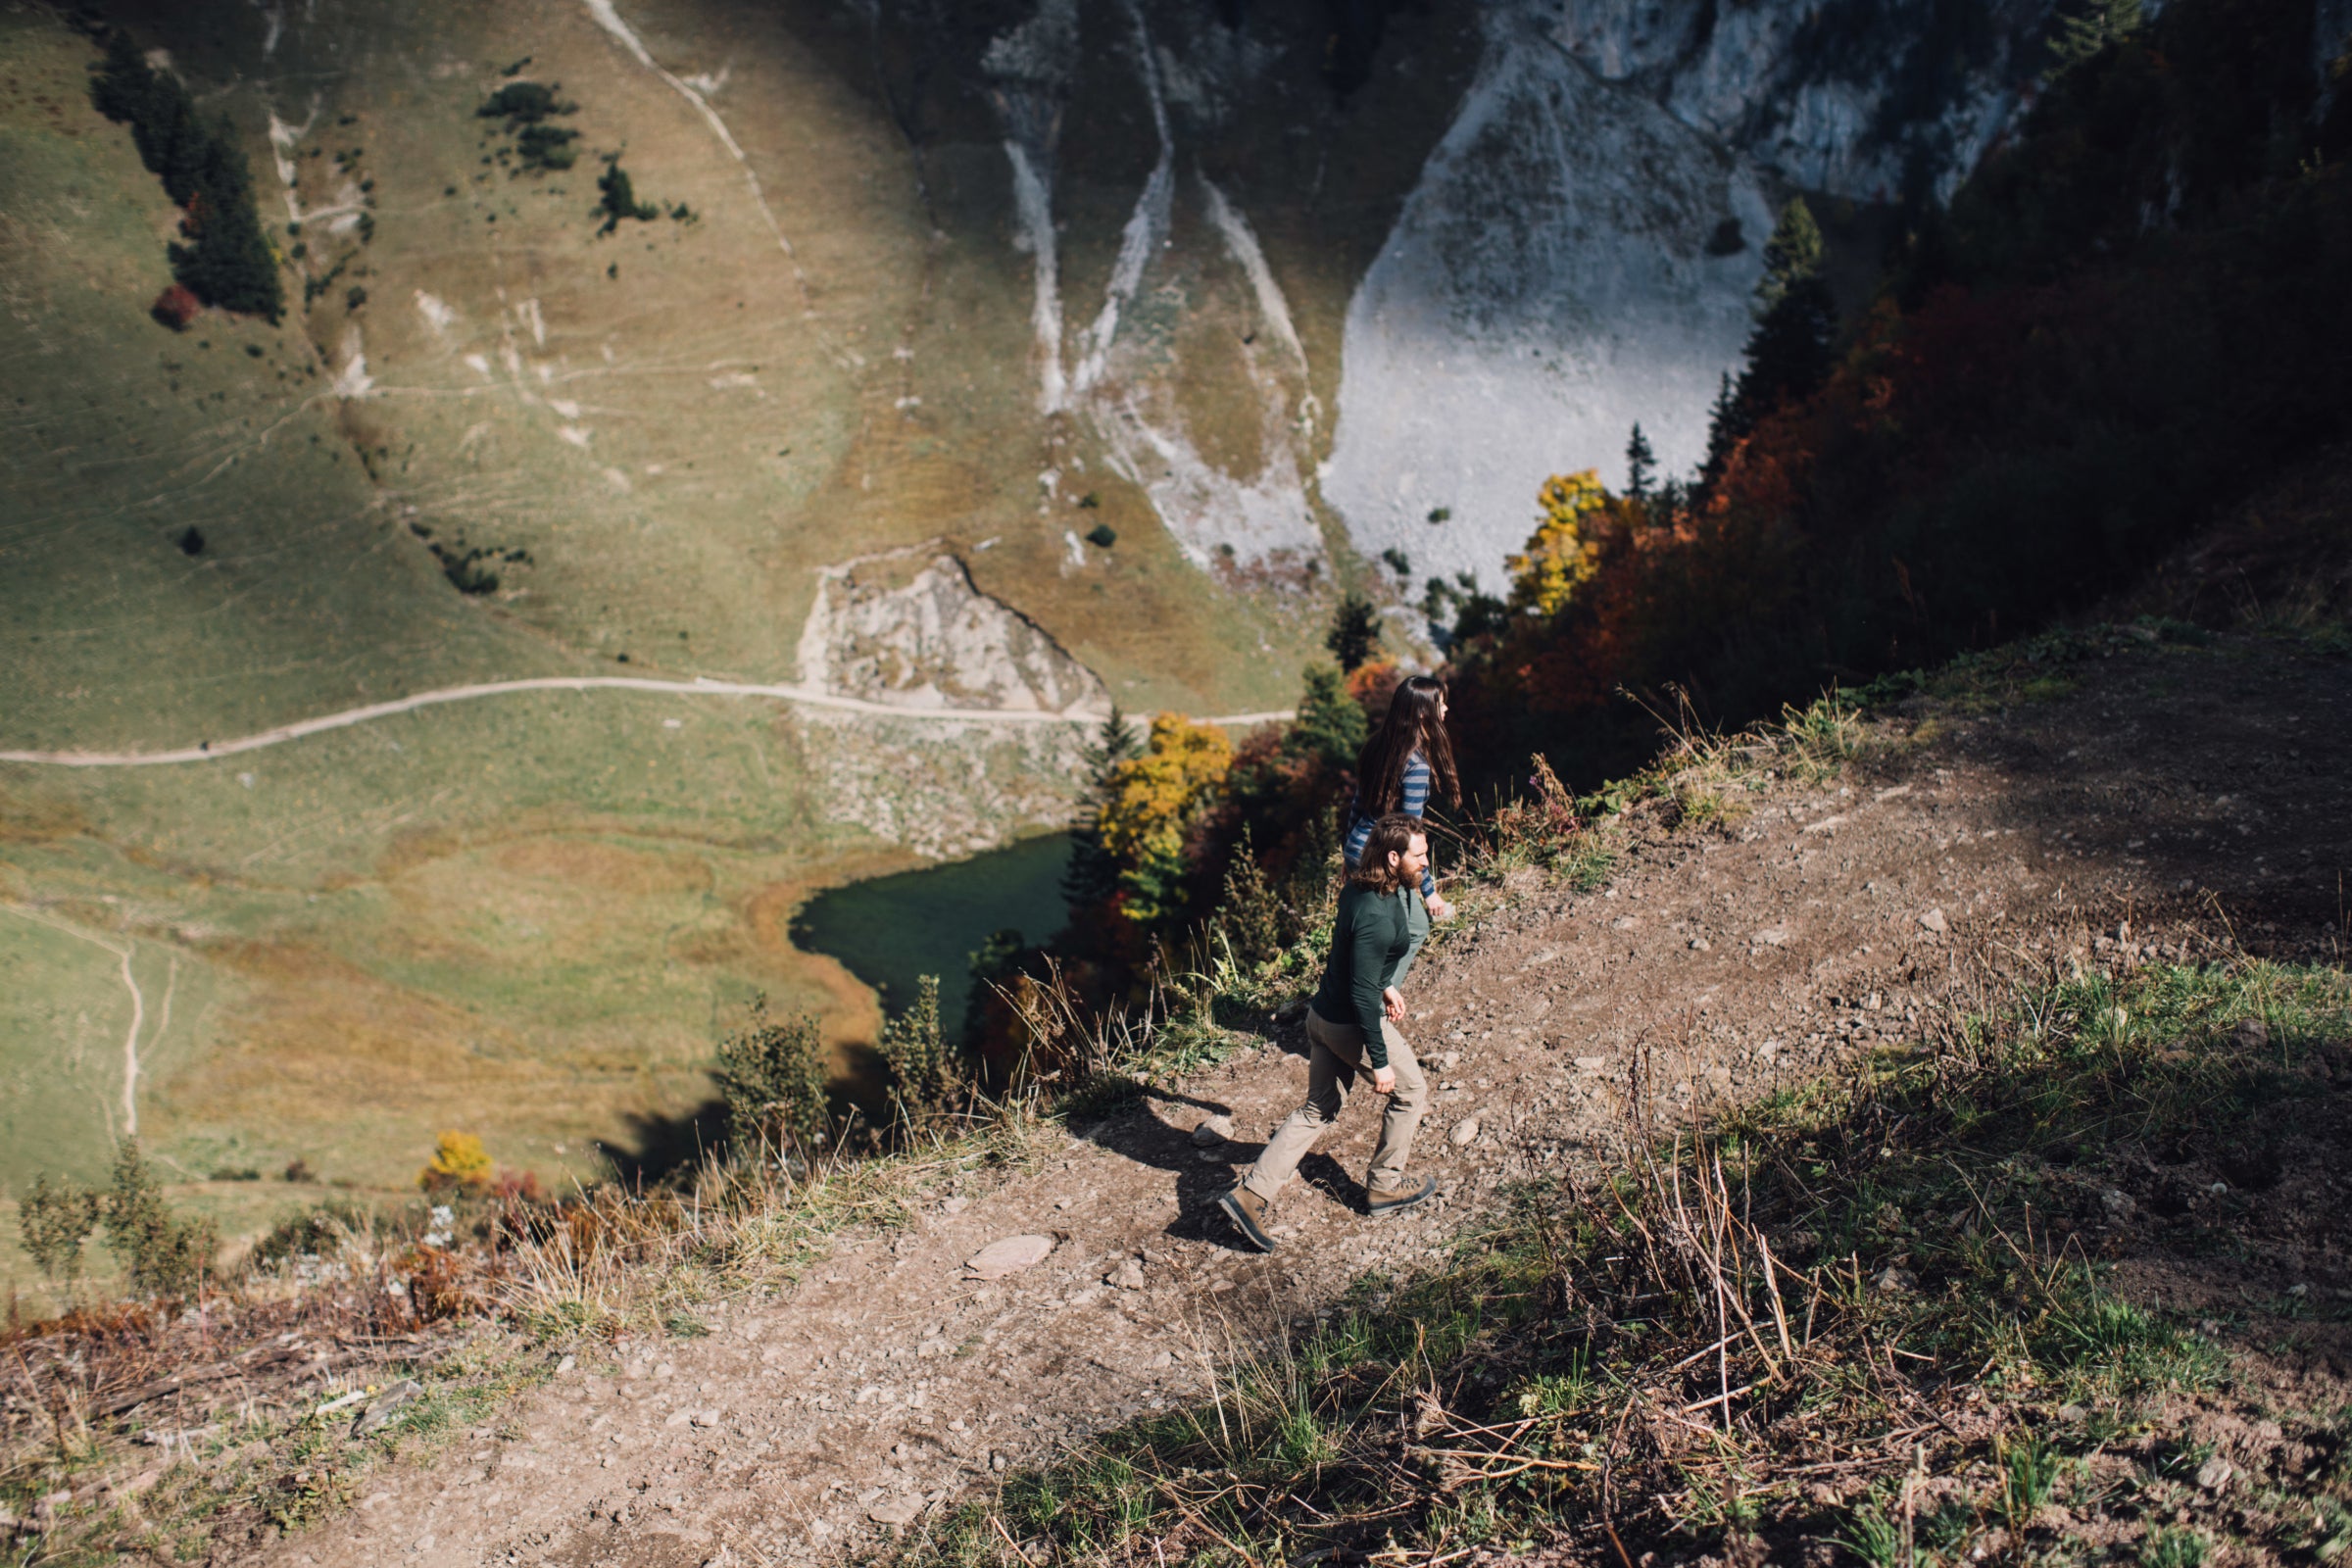 Two hikers descending a steep mountain trail with a view of a lake and trails below in a valley.